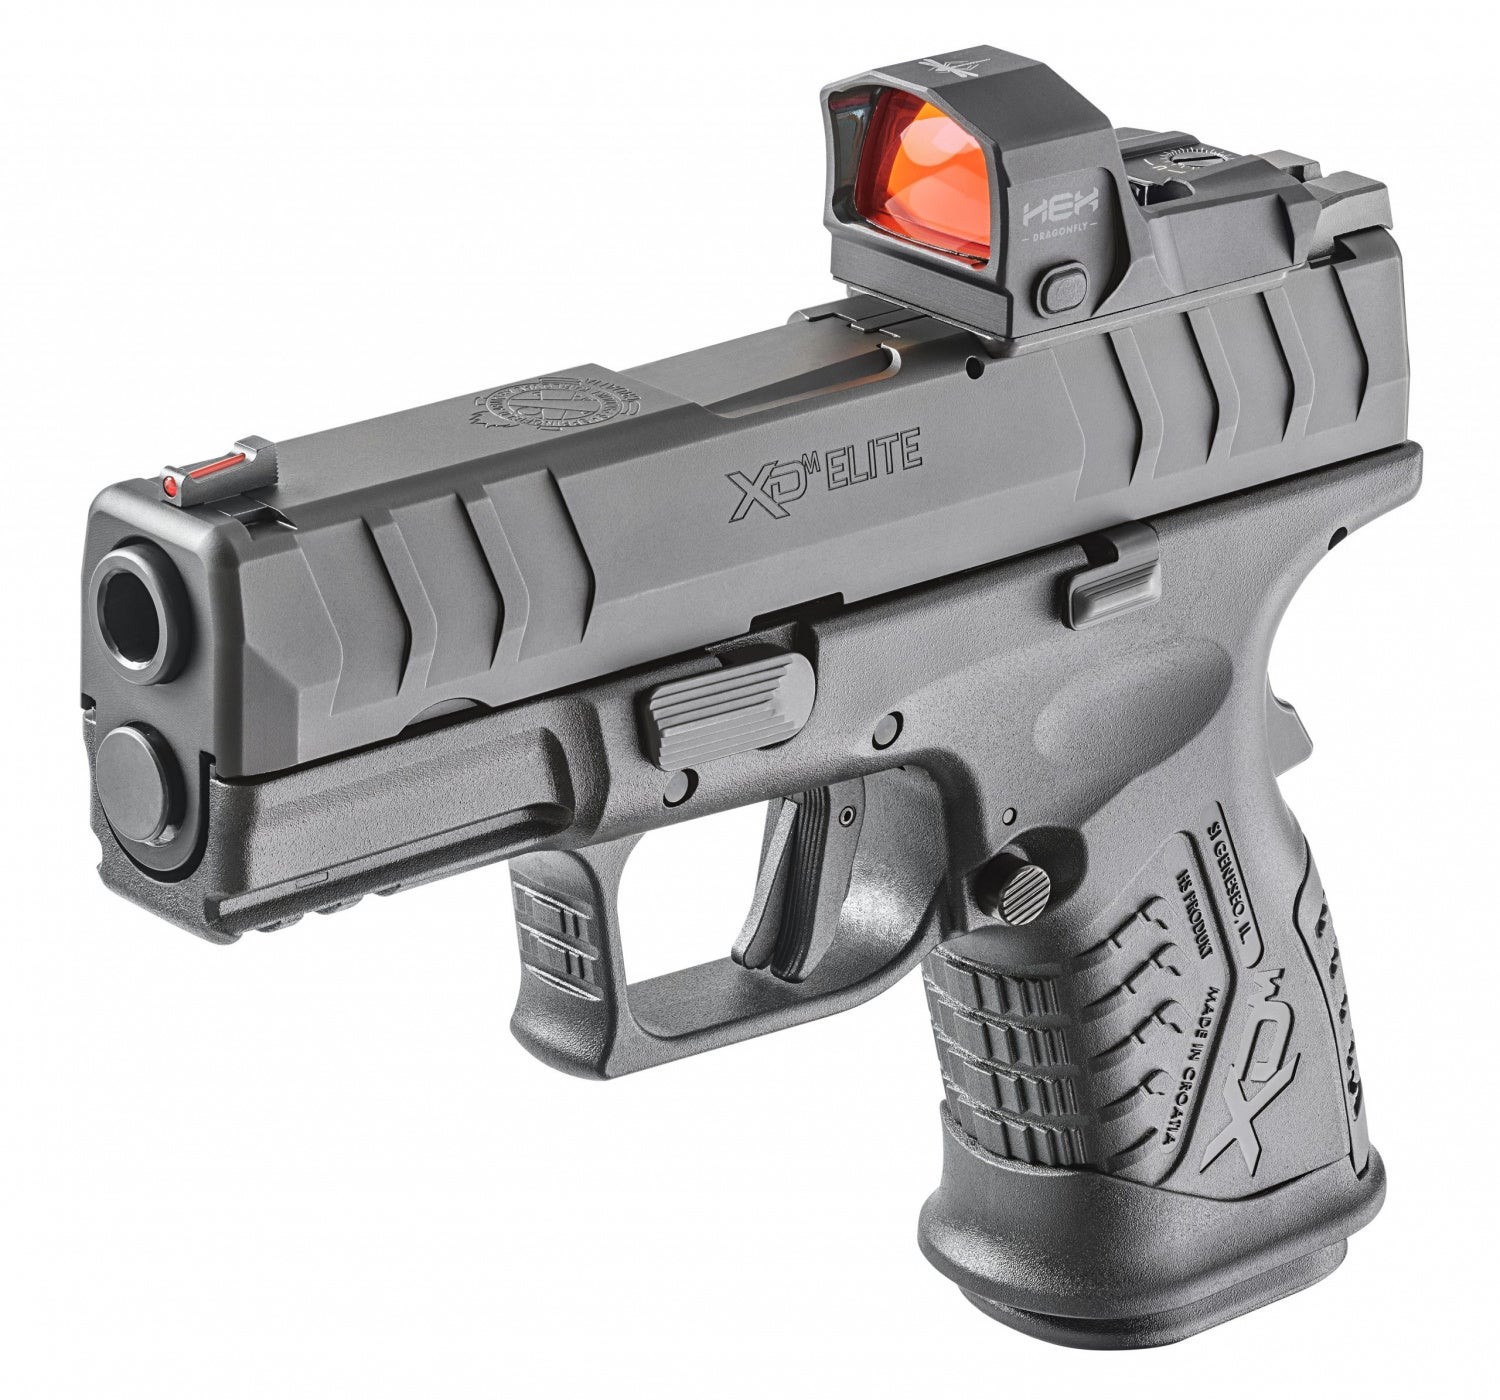 The Springfield Armory XD-M Elite 3.8" Compact OSP